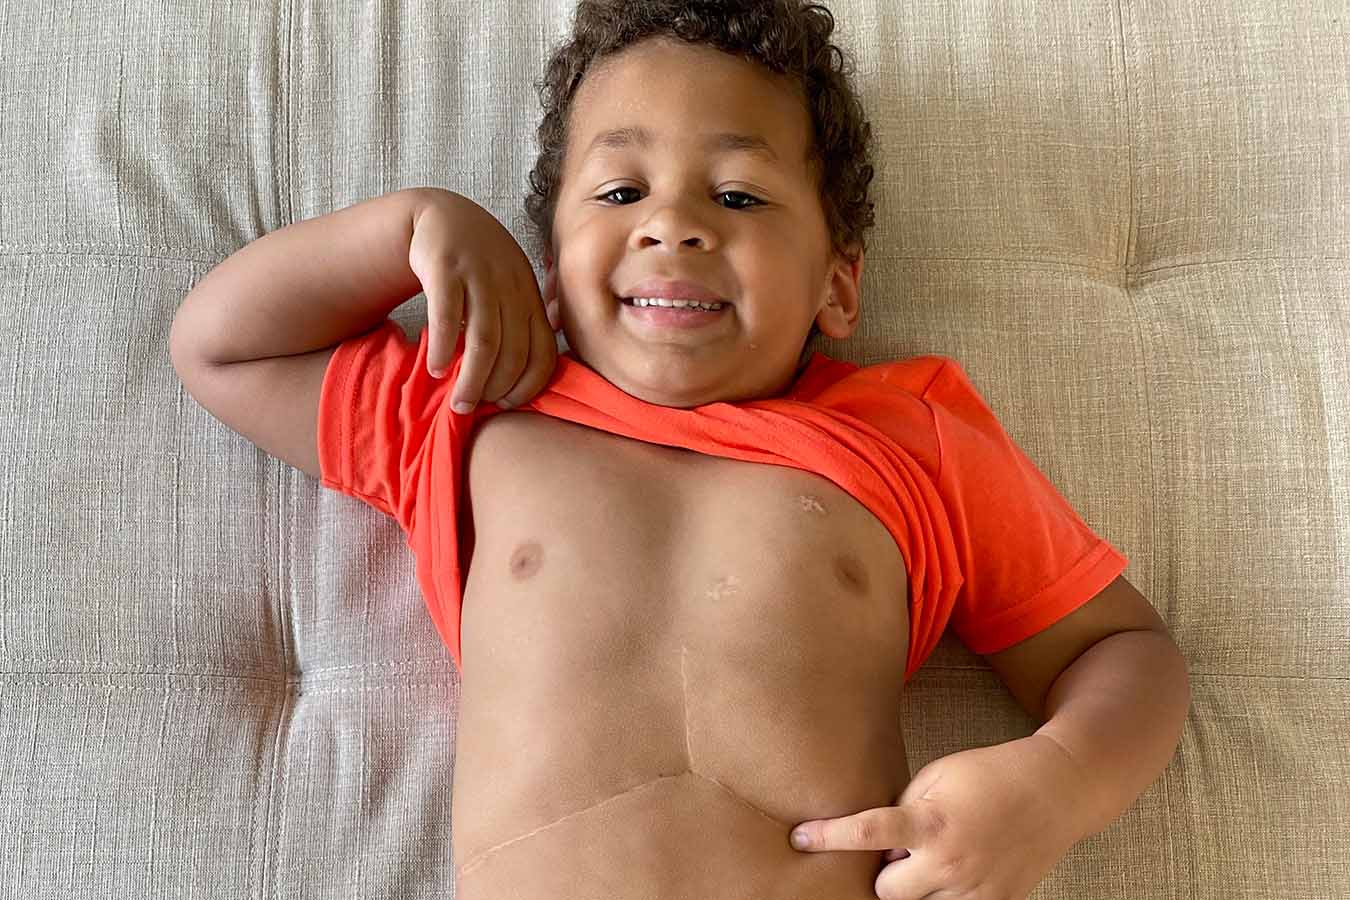 A boy proudly shows off his “Superman scar”